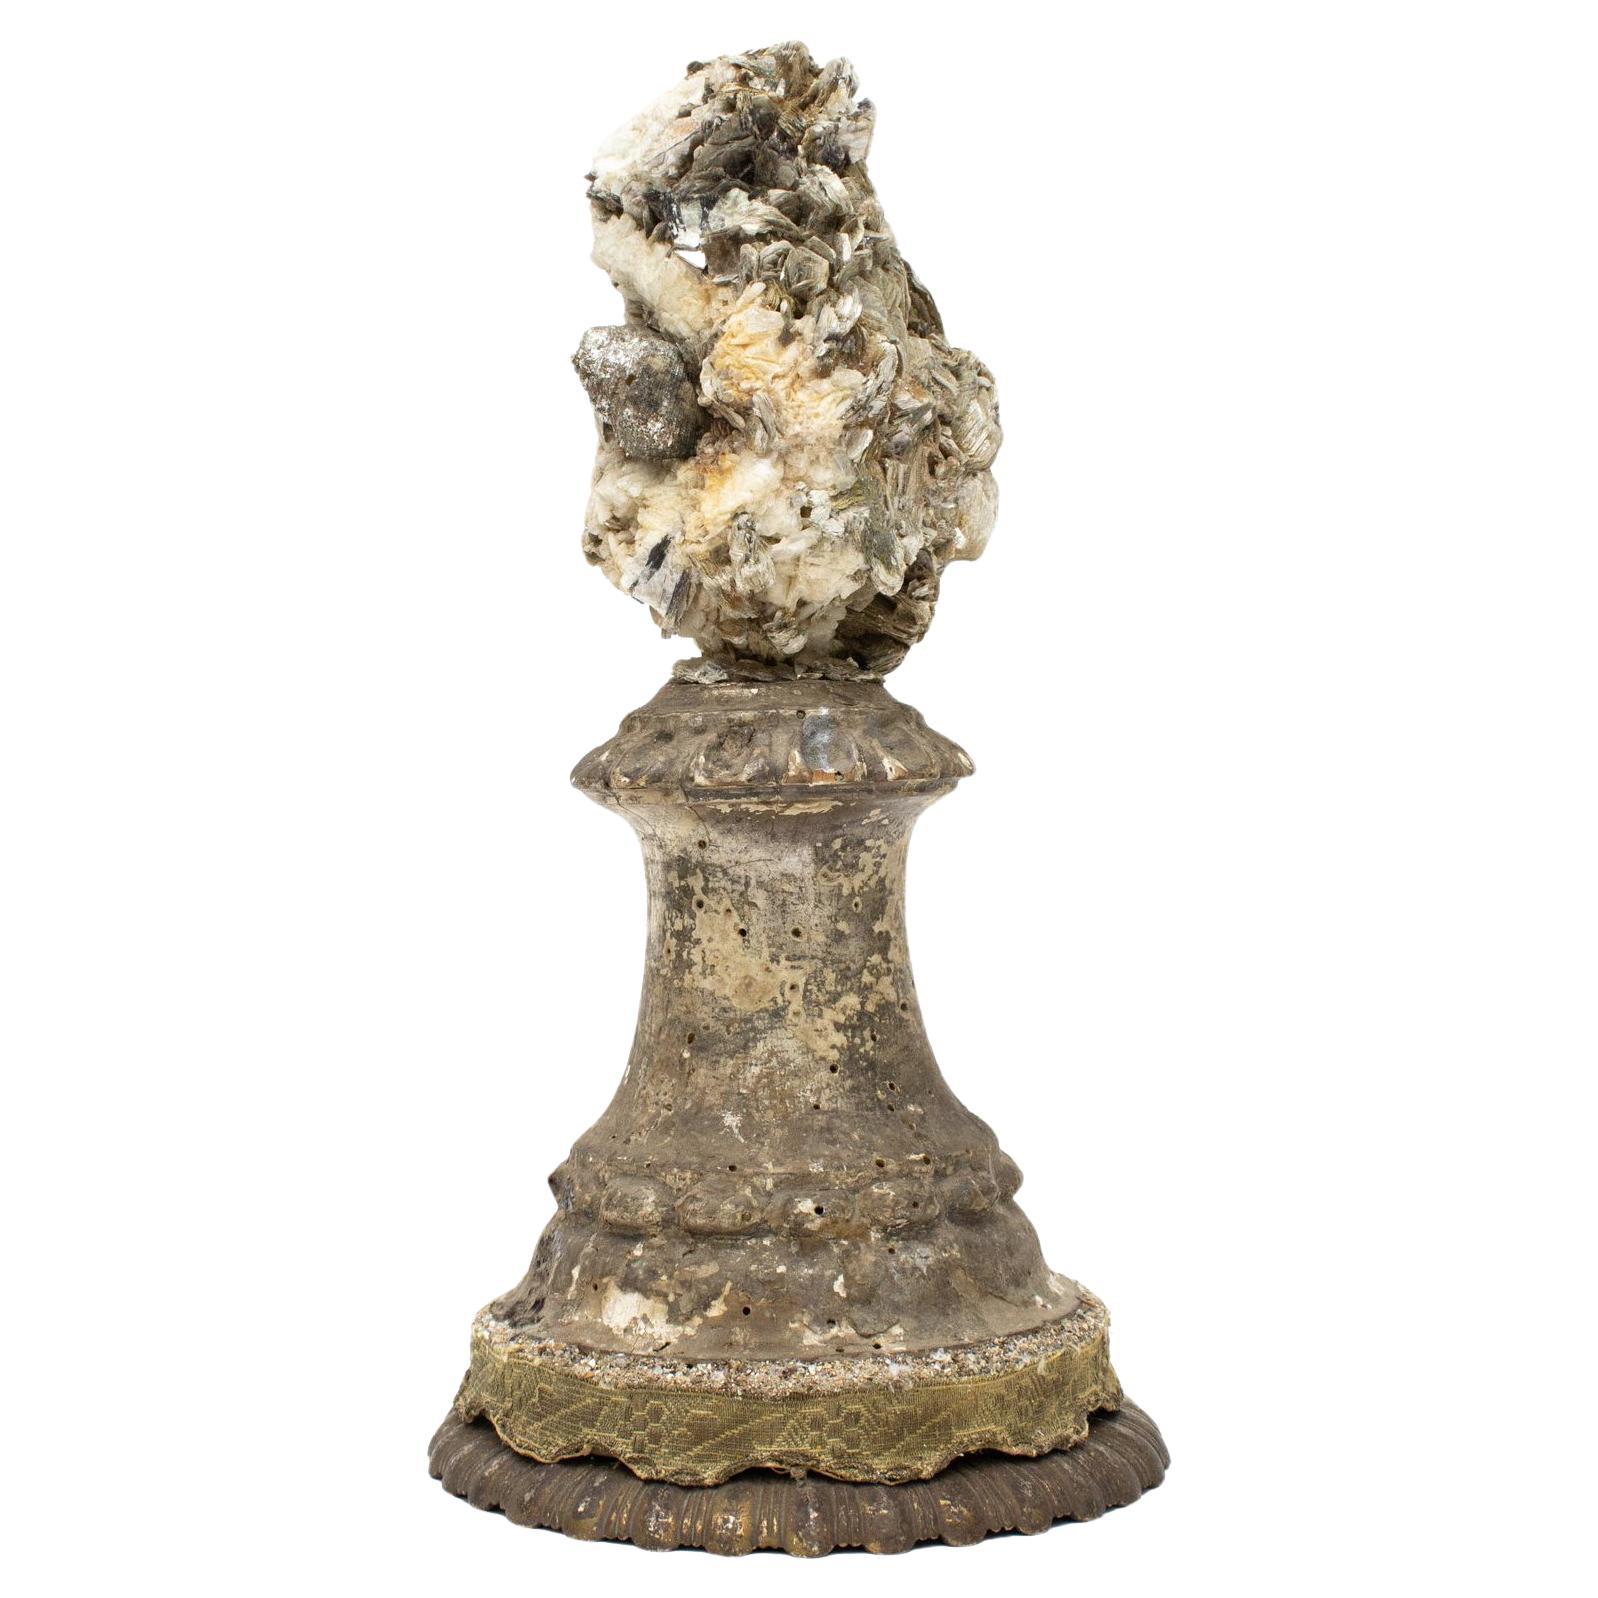 18th Century Italian Fragment Base with Mica in Matrix and Silver Leaf Shells